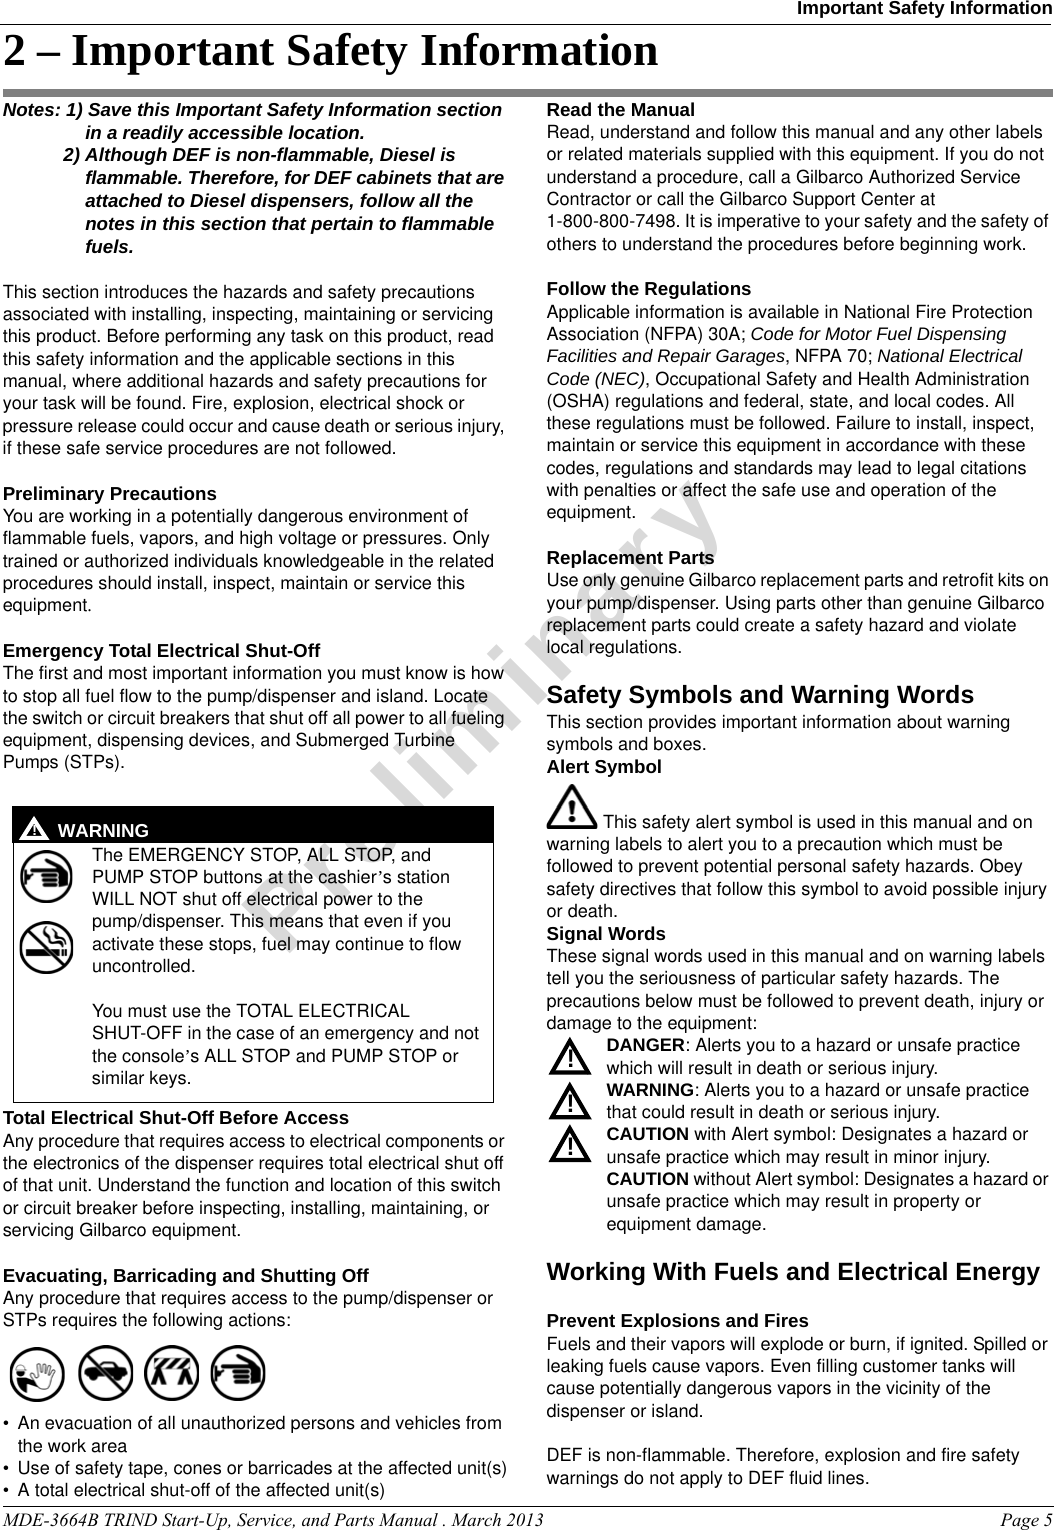 MDE-3664B TRIND Start-Up, Service, and Parts Manual . March 2013 Page 5Important Safety InformationPreliminary2 – Important Safety InformationNotes: 1) Save this Important Safety Information section in a readily accessible location. 2) Although DEF is non-flammable, Diesel is flammable. Therefore, for DEF cabinets that are attached to Diesel dispensers, follow all the notes in this section that pertain to flammable fuels.This section introduces the hazards and safety precautions associated with installing, inspecting, maintaining or servicing this product. Before performing any task on this product, read this safety information and the applicable sections in this manual, where additional hazards and safety precautions for your task will be found. Fire, explosion, electrical shock or pressure release could occur and cause death or serious injury, if these safe service procedures are not followed. Preliminary PrecautionsYou are working in a potentially dangerous environment of flammable fuels, vapors, and high voltage or pressures. Only trained or authorized individuals knowledgeable in the related procedures should install, inspect, maintain or service this equipment.Emergency Total Electrical Shut-OffThe first and most important information you must know is how to stop all fuel flow to the pump/dispenser and island. Locate the switch or circuit breakers that shut off all power to all fueling equipment, dispensing devices, and Submerged Turbine Pumps (STPs).  The EMERGENCY STOP, ALL STOP, and PUMP STOP buttons at the cashier’s station WILL NOT shut off electrical power to the pump/dispenser. This means that even if you activate these stops, fuel may continue to flow uncontrolled. You must use the TOTAL ELECTRICAL SHUT-OFF in the case of an emergency and not the console’s ALL STOP and PUMP STOP or similar keys.!WARNING!Total Electrical Shut-Off Before AccessAny procedure that requires access to electrical components or the electronics of the dispenser requires total electrical shut off of that unit. Understand the function and location of this switch or circuit breaker before inspecting, installing, maintaining, or servicing Gilbarco equipment.Evacuating, Barricading and Shutting OffAny procedure that requires access to the pump/dispenser or STPs requires the following actions:• An evacuation of all unauthorized persons and vehicles from the work area • Use of safety tape, cones or barricades at the affected unit(s)• A total electrical shut-off of the affected unit(s)Read the ManualRead, understand and follow this manual and any other labels or related materials supplied with this equipment. If you do not understand a procedure, call a Gilbarco Authorized Service Contractor or call the Gilbarco Support Center at 1-800-800-7498. It is imperative to your safety and the safety of others to understand the procedures before beginning work.Follow the RegulationsApplicable information is available in National Fire Protection Association (NFPA) 30A; Code for Motor Fuel Dispensing Facilities and Repair Garages, NFPA 70; National Electrical Code (NEC), Occupational Safety and Health Administration (OSHA) regulations and federal, state, and local codes. All these regulations must be followed. Failure to install, inspect, maintain or service this equipment in accordance with these codes, regulations and standards may lead to legal citations with penalties or affect the safe use and operation of the equipment.Replacement PartsUse only genuine Gilbarco replacement parts and retrofit kits on your pump/dispenser. Using parts other than genuine Gilbarco replacement parts could create a safety hazard and violate local regulations.Safety Symbols and Warning WordsThis section provides important information about warning symbols and boxes.Alert Symbol This safety alert symbol is used in this manual and on warning labels to alert you to a precaution which must be followed to prevent potential personal safety hazards. Obey safety directives that follow this symbol to avoid possible injury or death.Signal WordsThese signal words used in this manual and on warning labels tell you the seriousness of particular safety hazards. The precautions below must be followed to prevent death, injury or damage to the equipment:DANGER: Alerts you to a hazard or unsafe practice which will result in death or serious injury.WARNING: Alerts you to a hazard or unsafe practice that could result in death or serious injury. CAUTION with Alert symbol: Designates a hazard or unsafe practice which may result in minor injury.CAUTION without Alert symbol: Designates a hazard or unsafe practice which may result in property or equipment damage.Working With Fuels and Electrical EnergyPrevent Explosions and FiresFuels and their vapors will explode or burn, if ignited. Spilled or leaking fuels cause vapors. Even filling customer tanks will cause potentially dangerous vapors in the vicinity of the dispenser or island.DEF is non-flammable. Therefore, explosion and fire safety warnings do not apply to DEF fluid lines.!!!